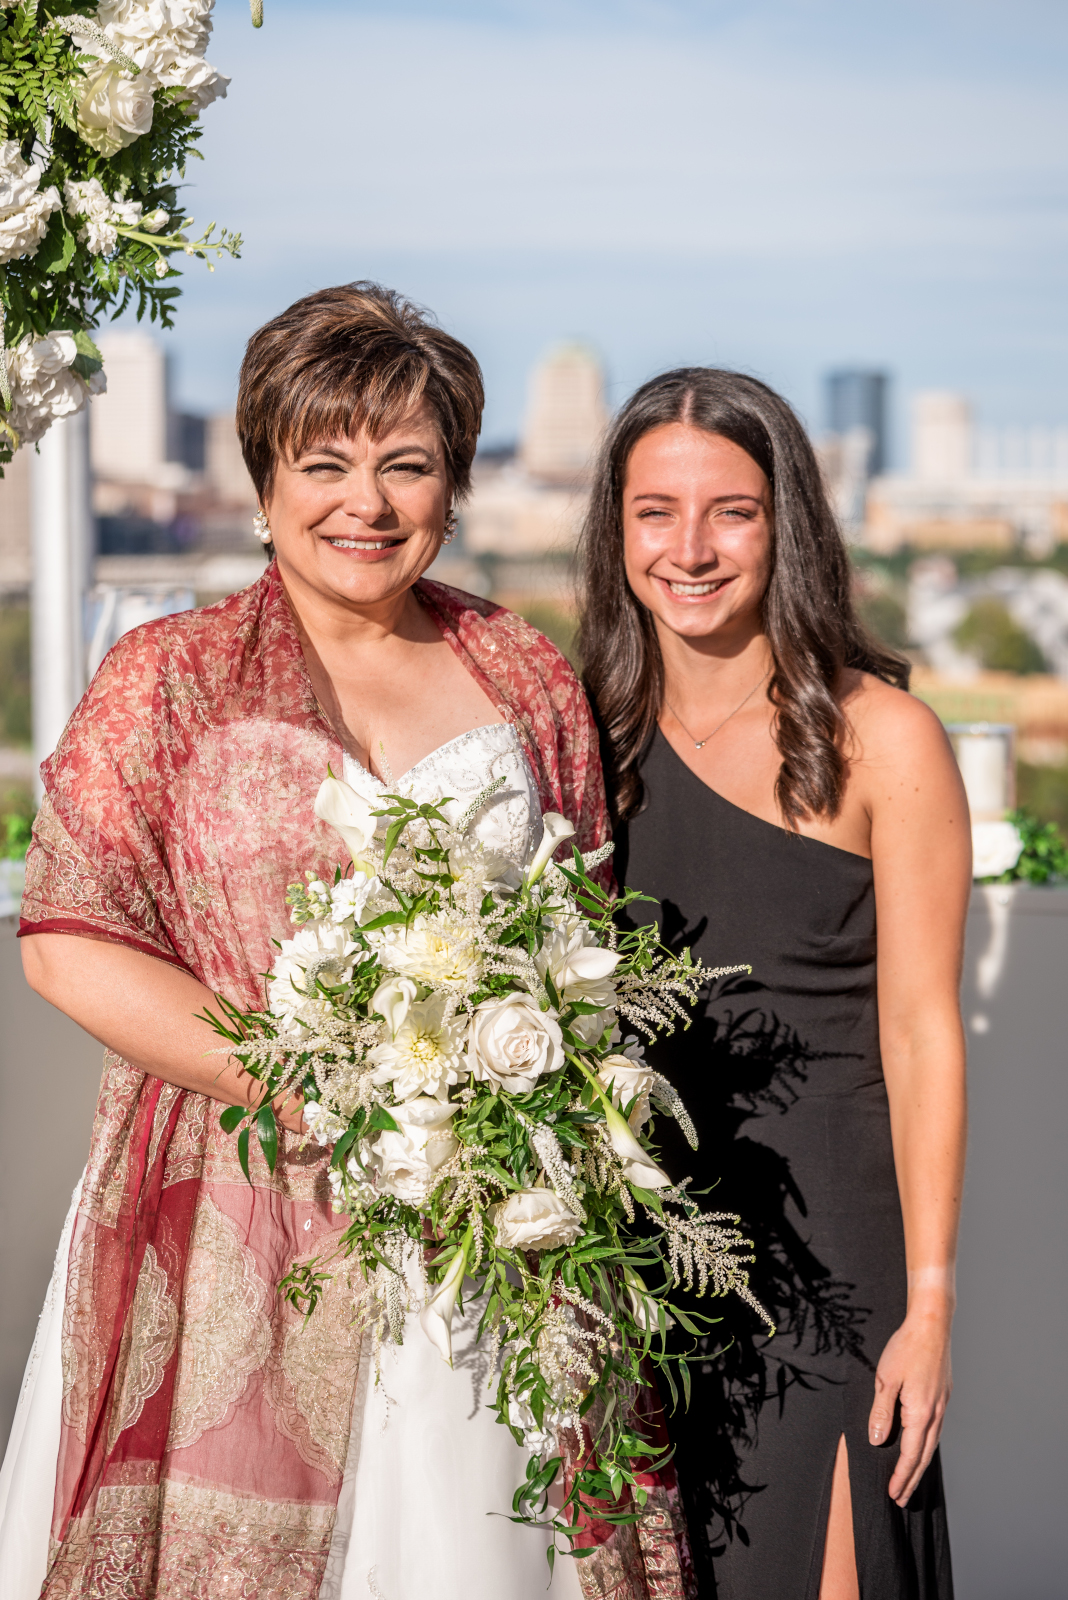 Bride with daughter, small bridal party, bridal party portrait, older couple, romantic outdoor urban wedding ceremony at Penthouse Events, Ohio City, Cleveland Flats, downtown Cleveland skyline